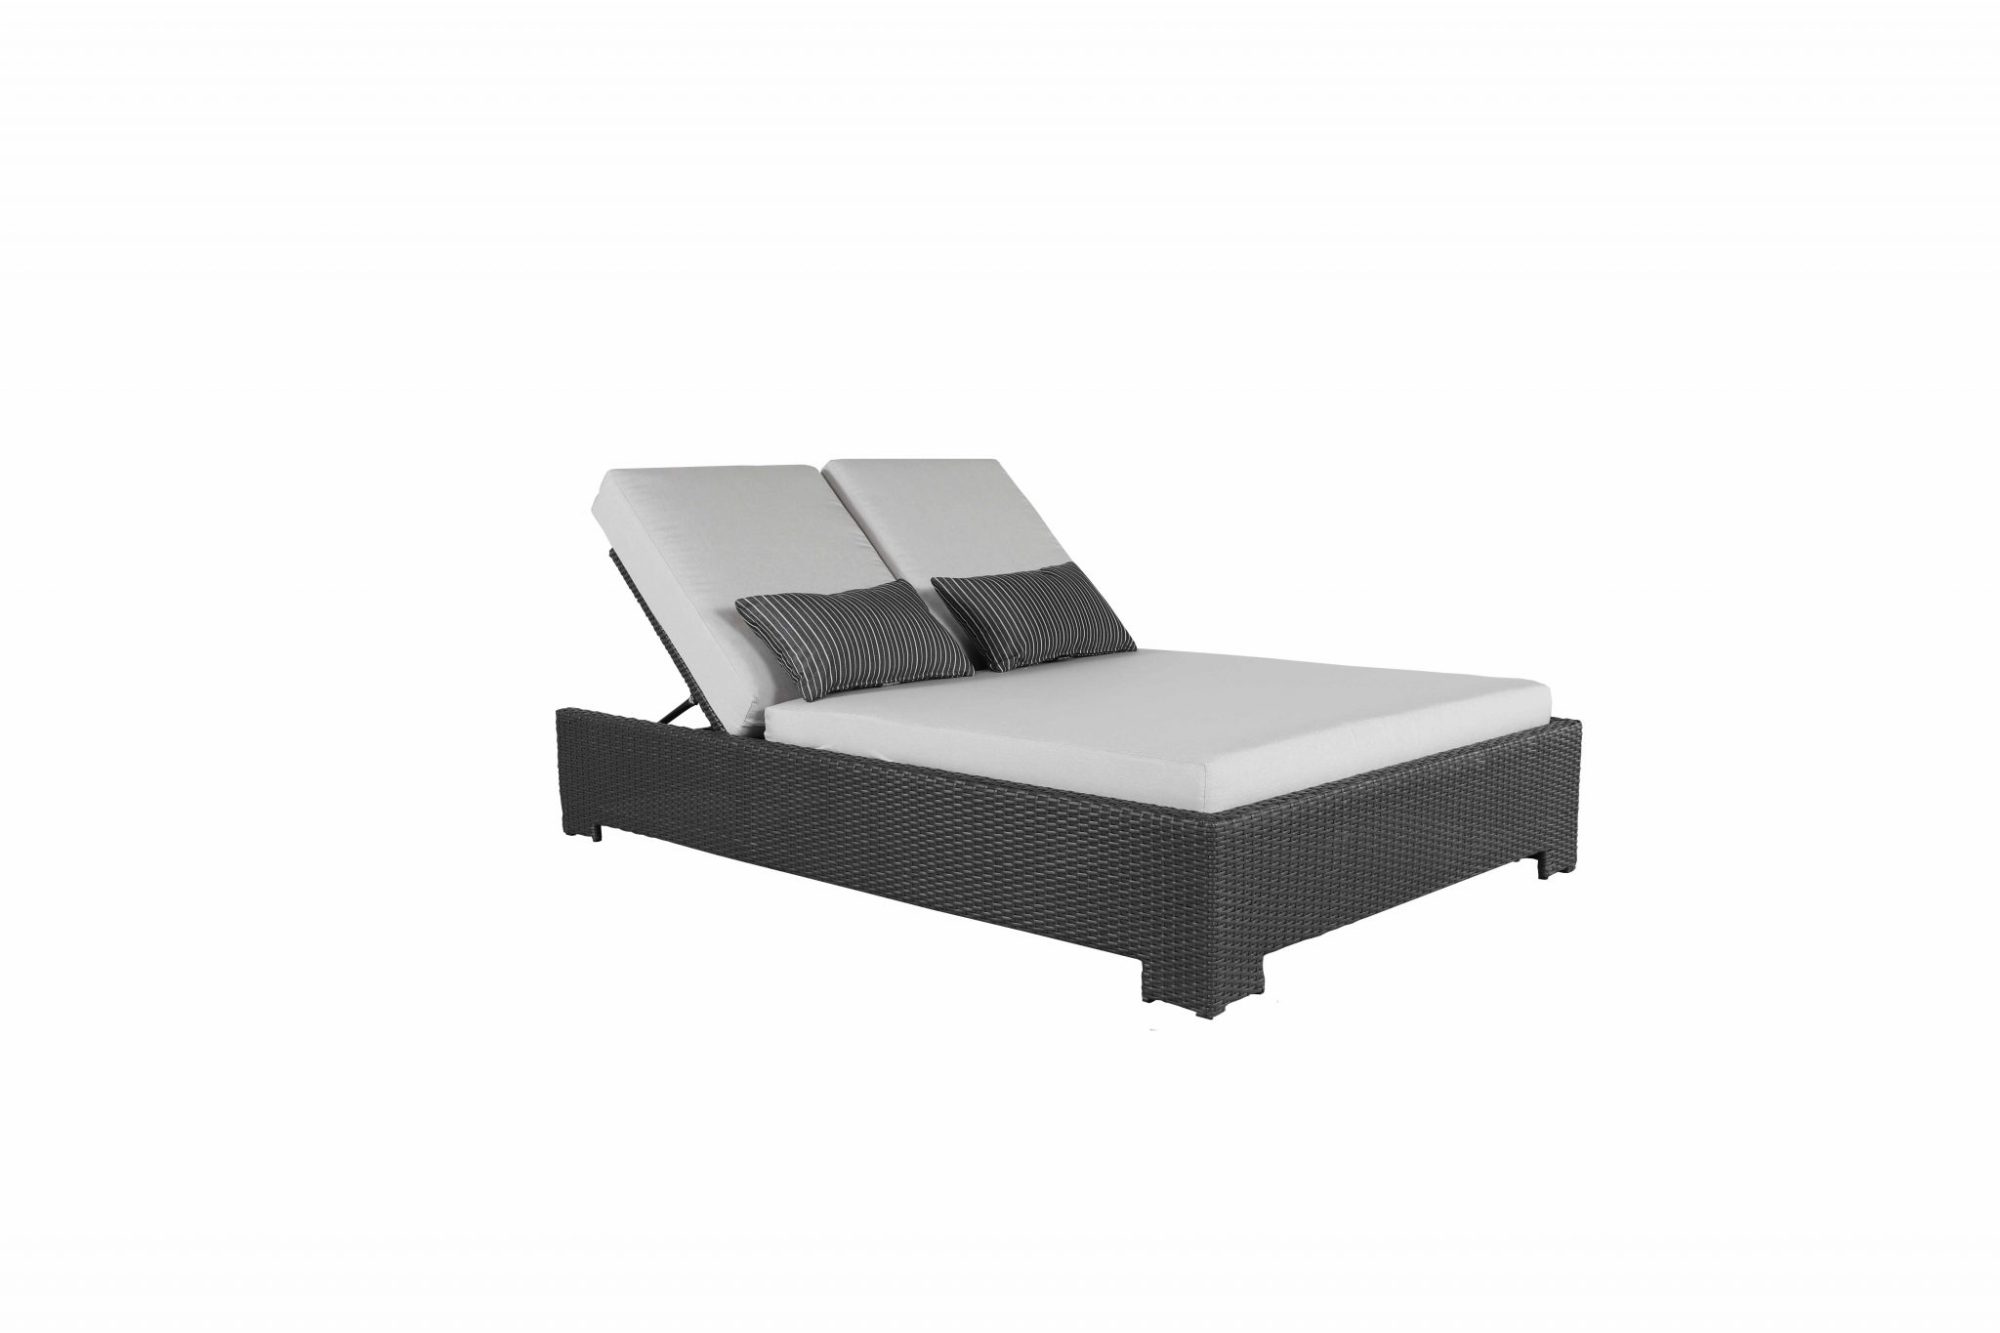 Outdoor Daybeds, Outdoor Bed With Canopy Canada